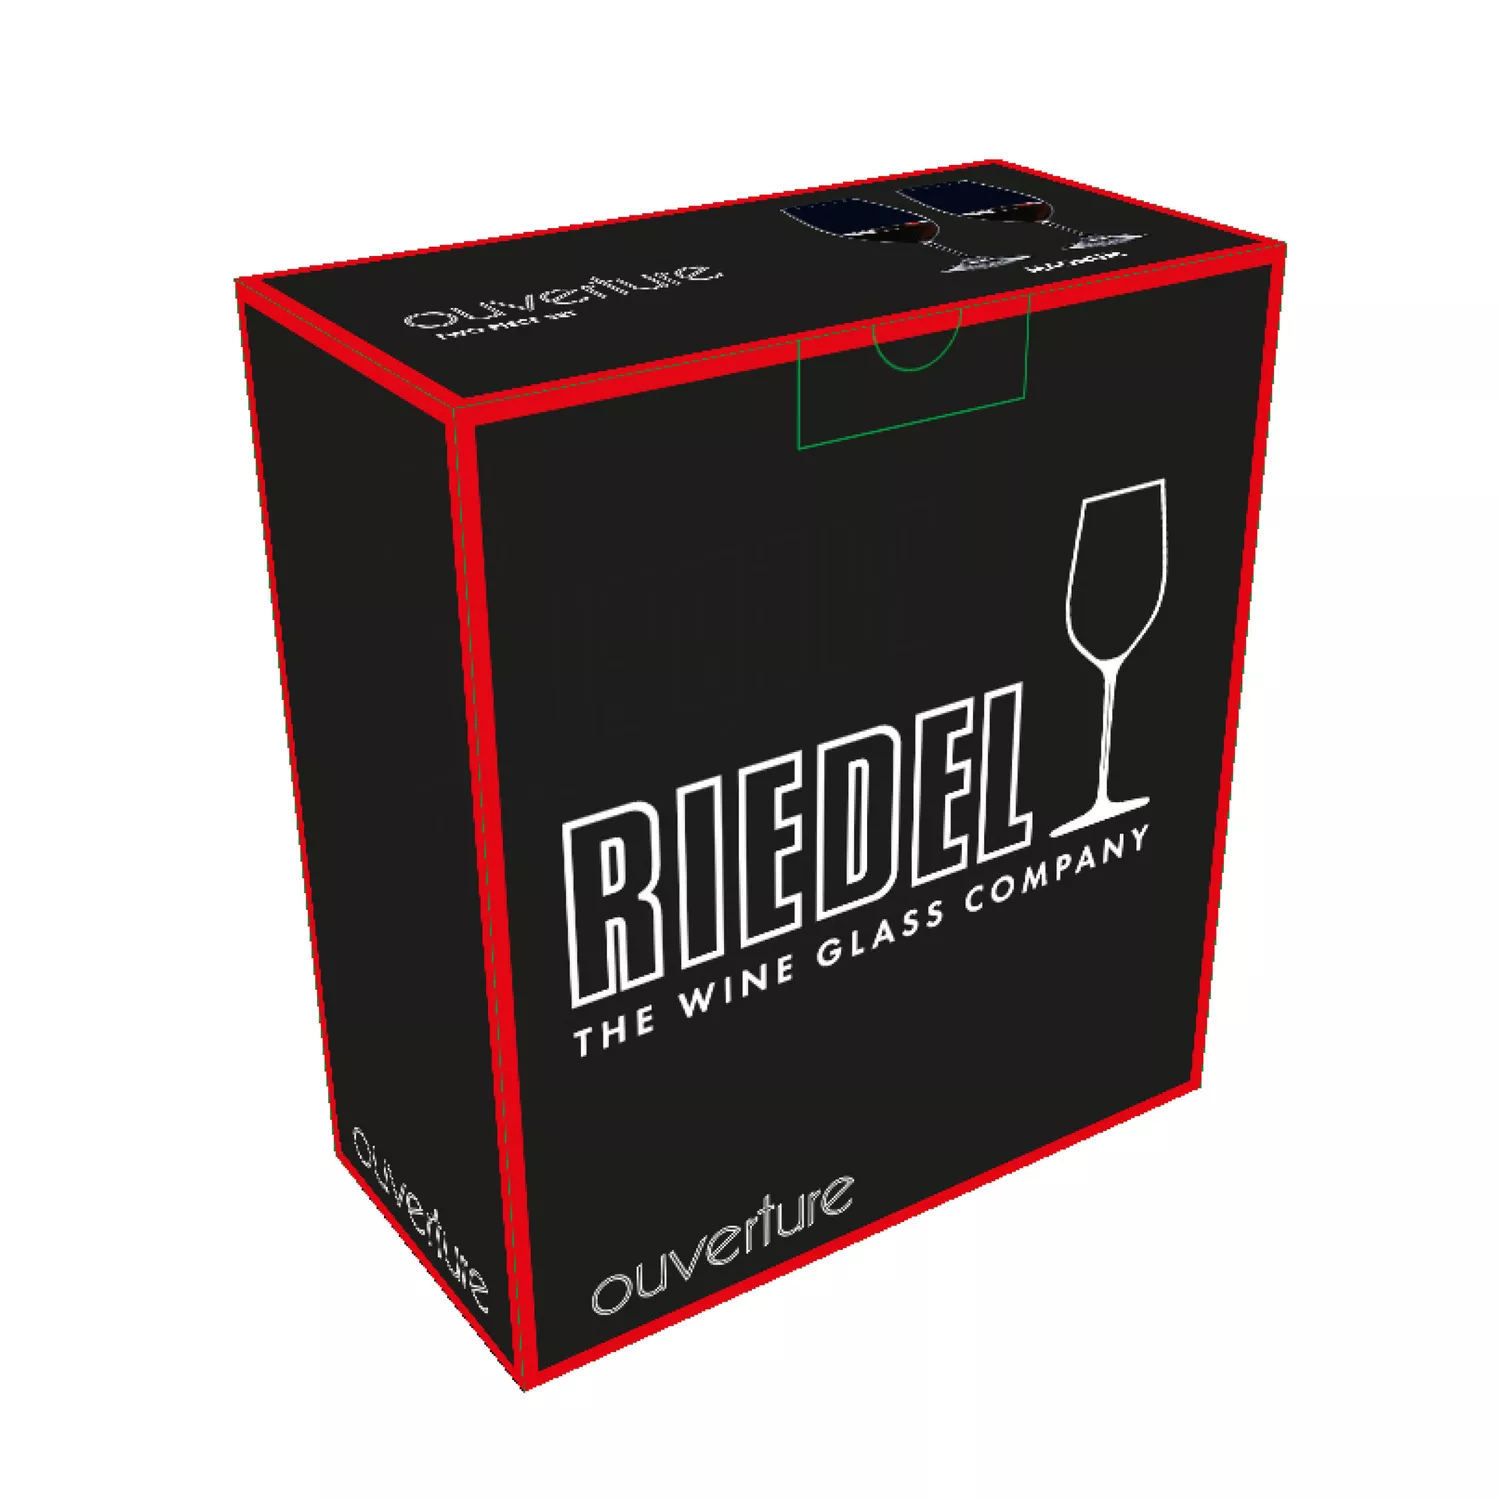 RIEDEL Ouverture Magnum Wine Glass, Set of 2